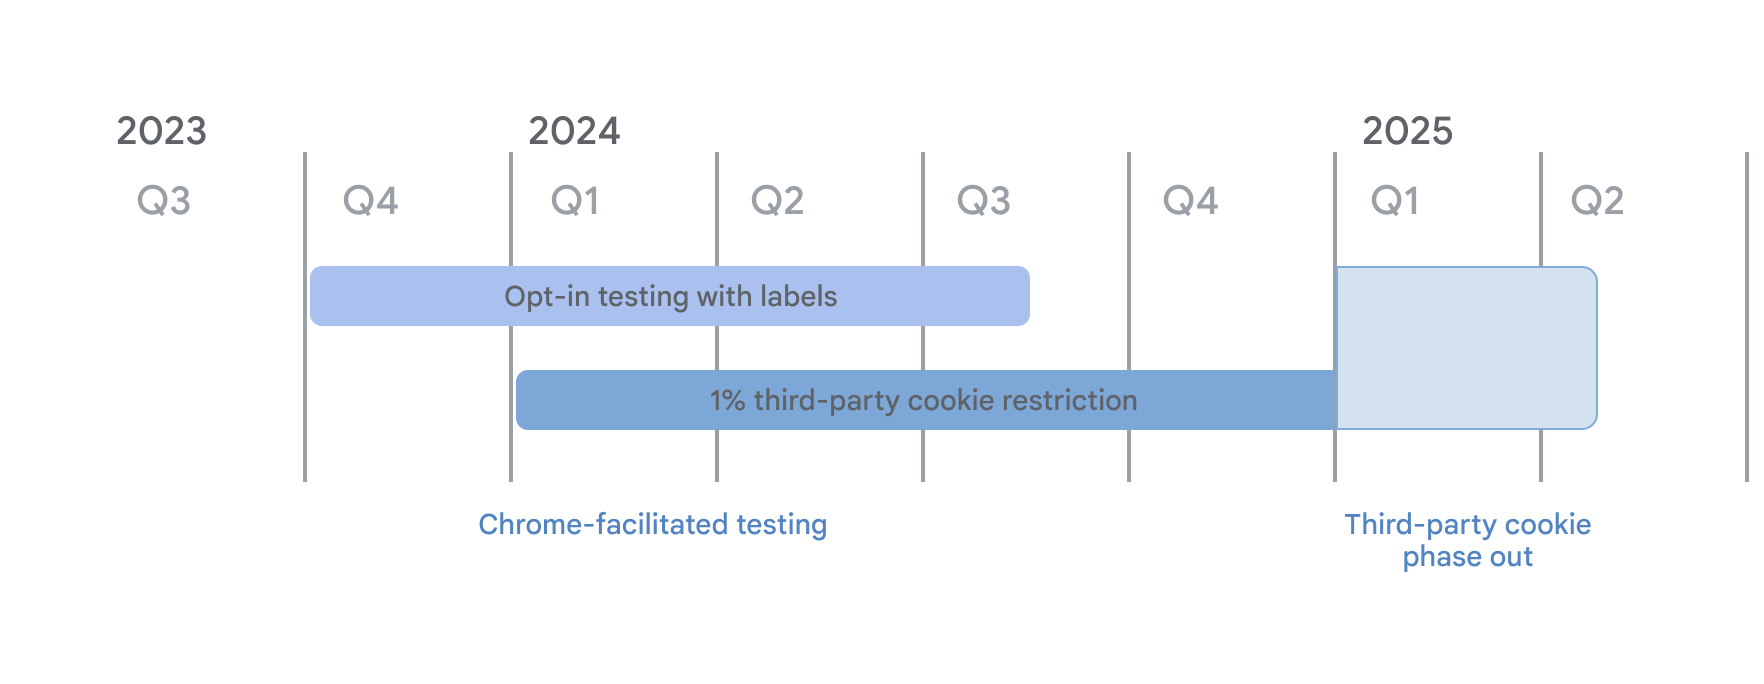 Timeline for third-party cookie depraction. As part of Chrome-facilitated testing, the opt-in testing with labels mode began in Q4 2023 and the 1% 3PC restrictions from January 4th, 2024. Both continue through to Q1 2025 when the third-party cookie phaseout starts.